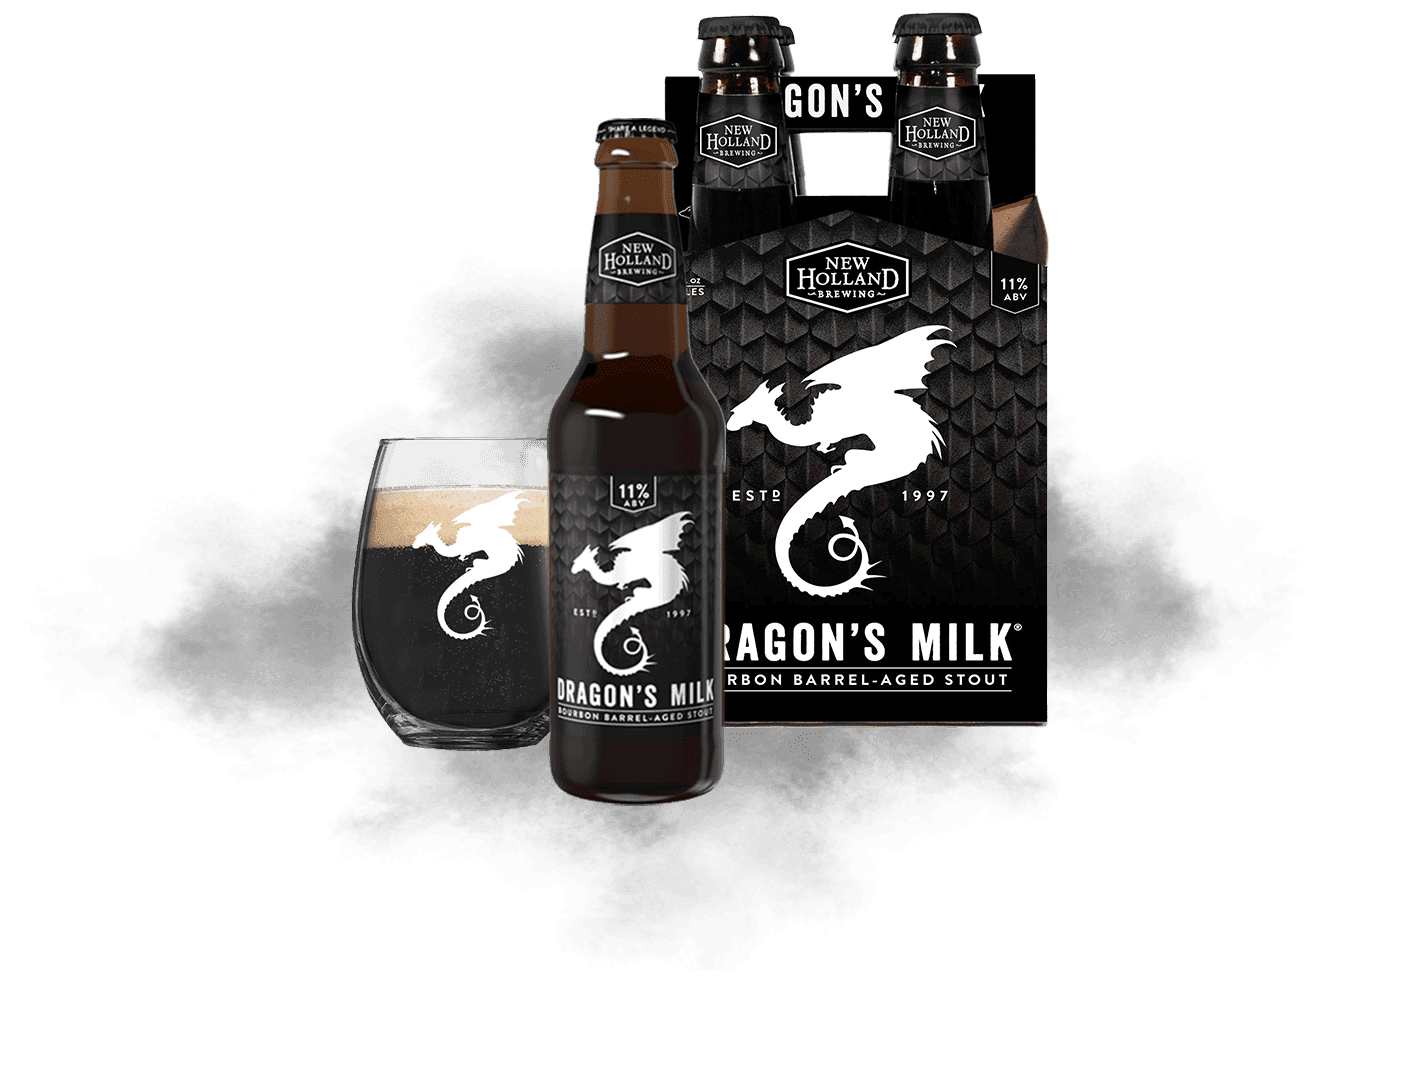 New Holland Brewery Logo - About Dragon's Milk | Milk of the Dragon | New Holland Brewing